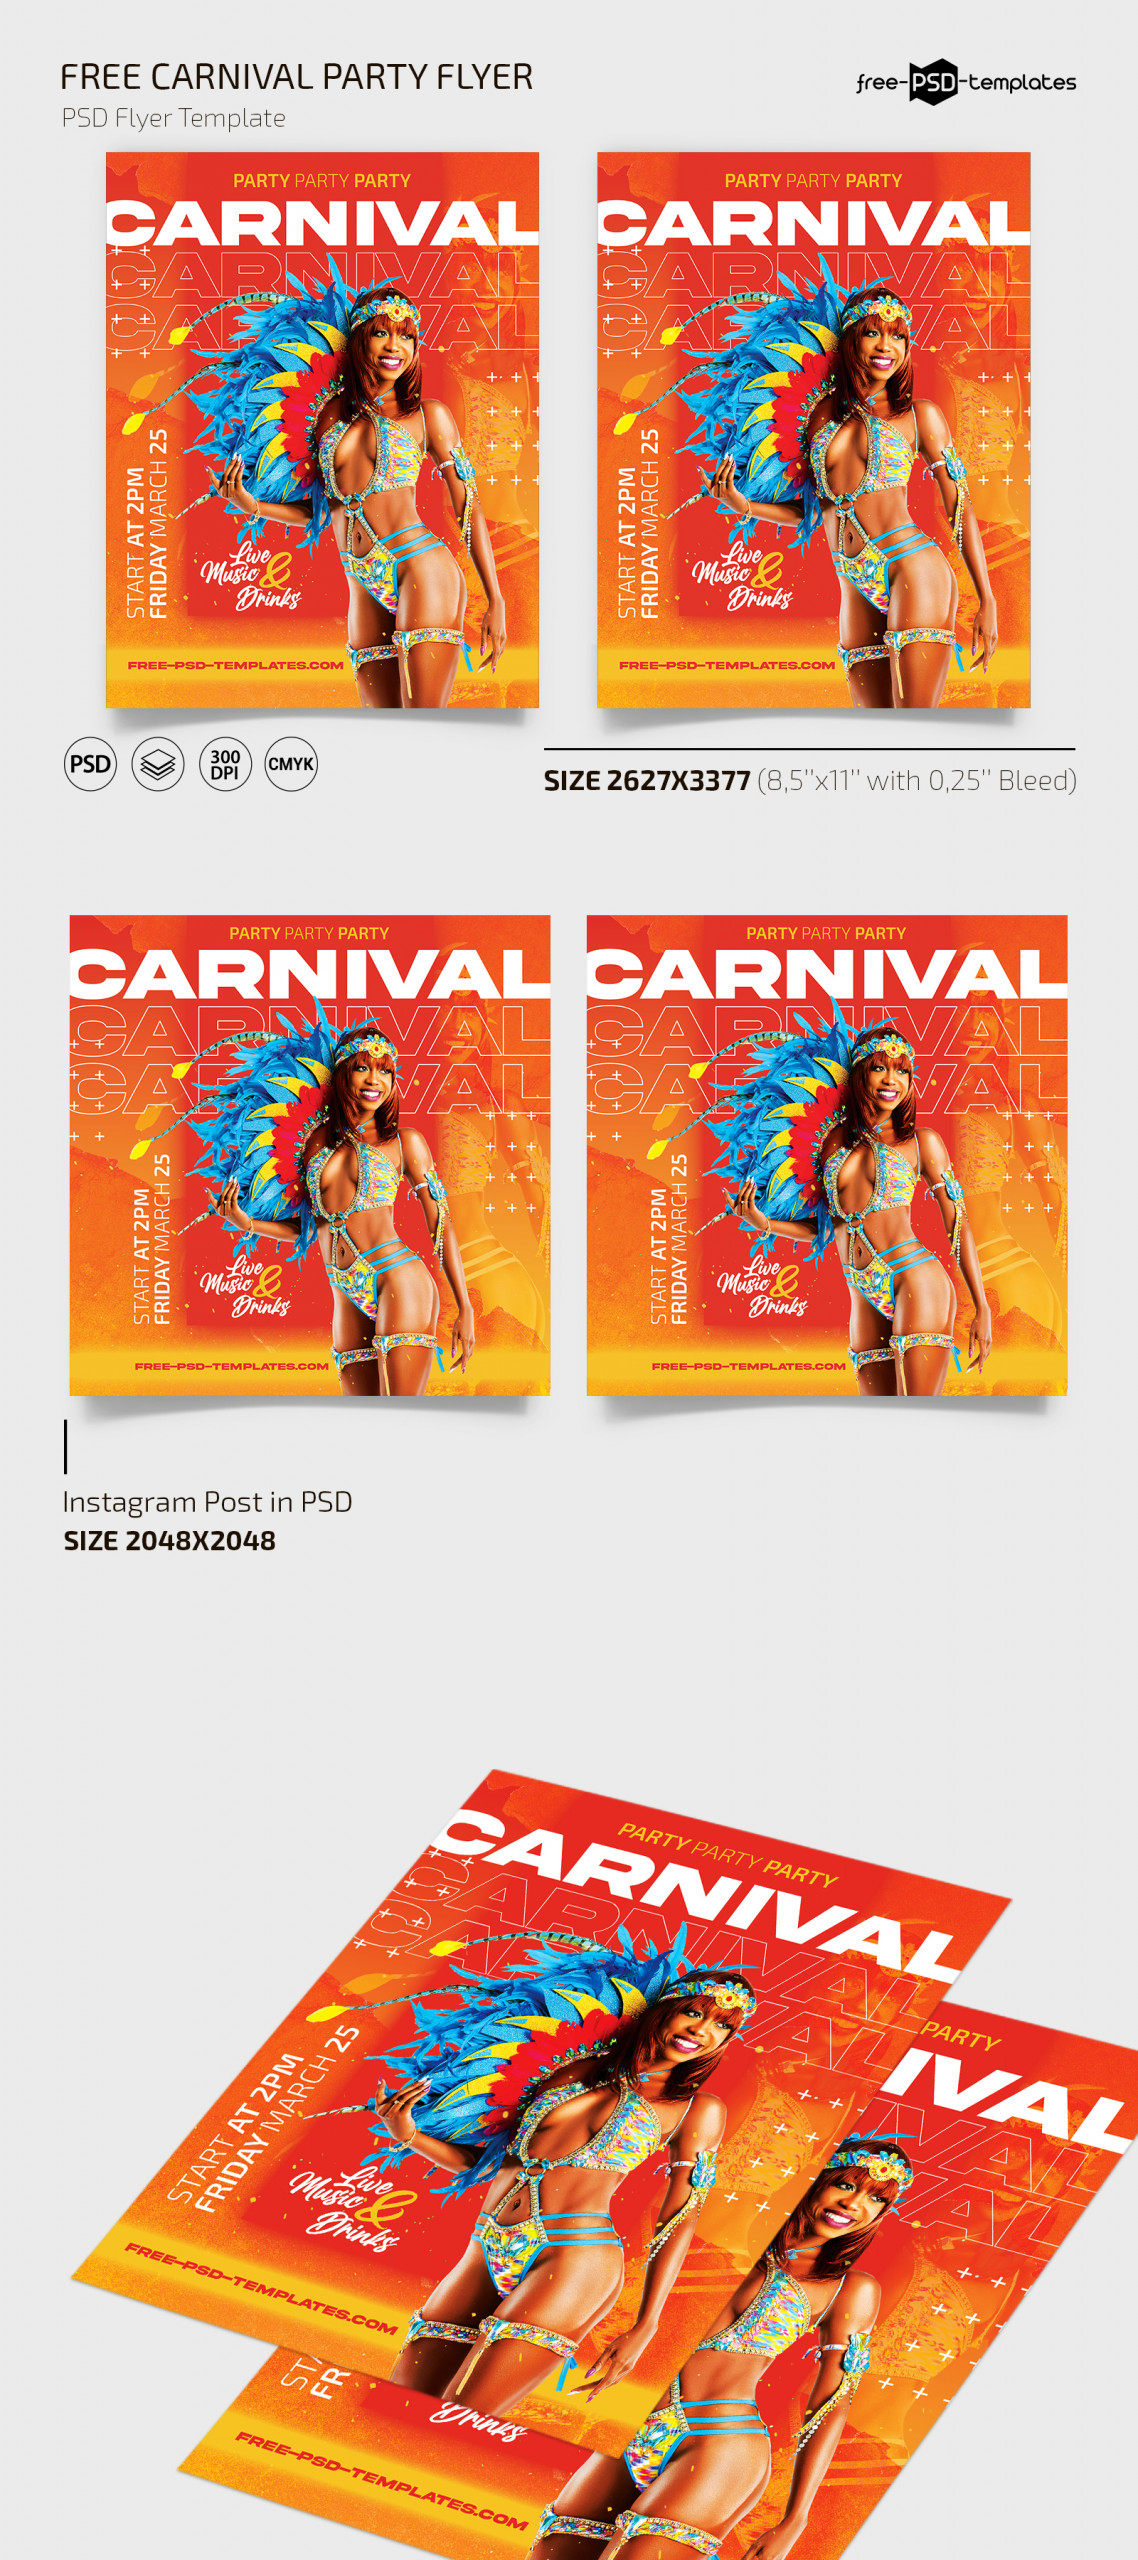 Free Carnival Party Flyer Template + Instagram Post (PSD)